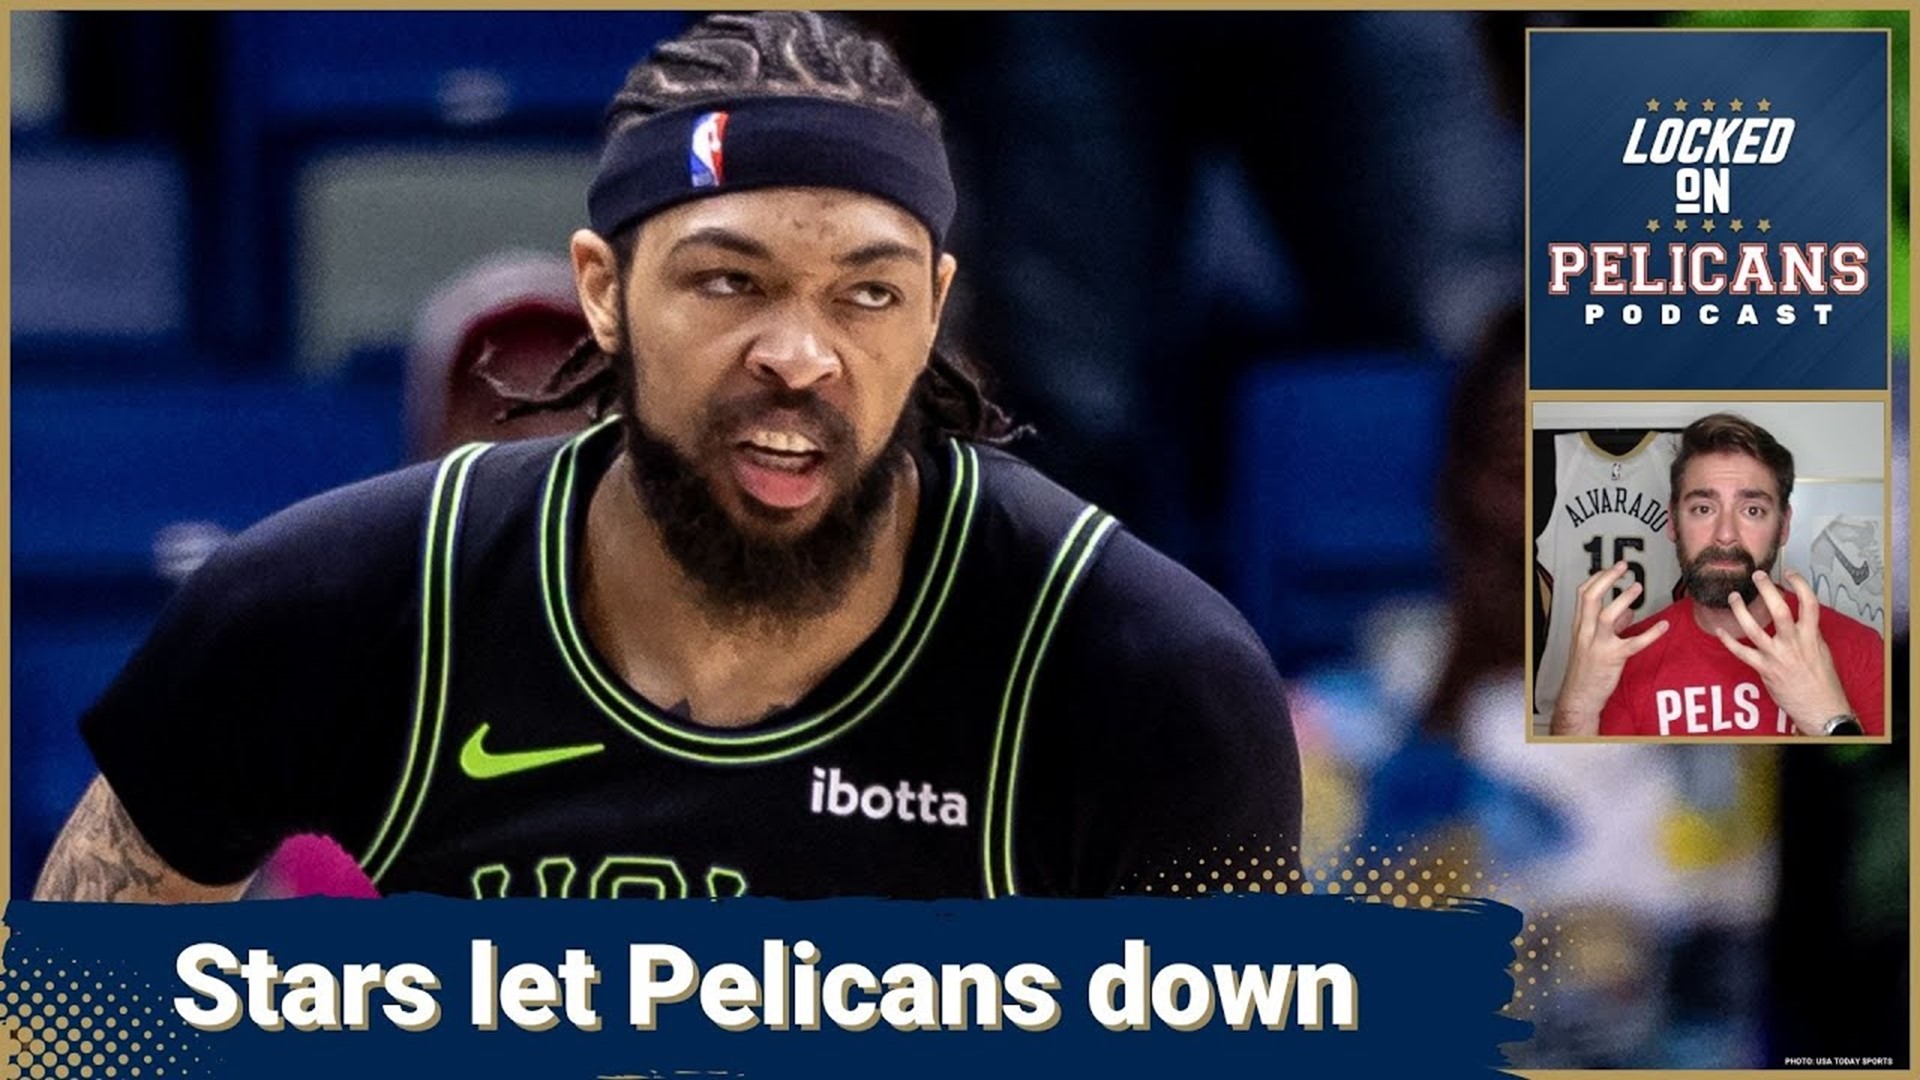 The New Orleans Pelicans should have won Game 1 of their playoff series against the Oklahoma City Thunder but Brandon Ingram and CJ McCollum played too poorly.